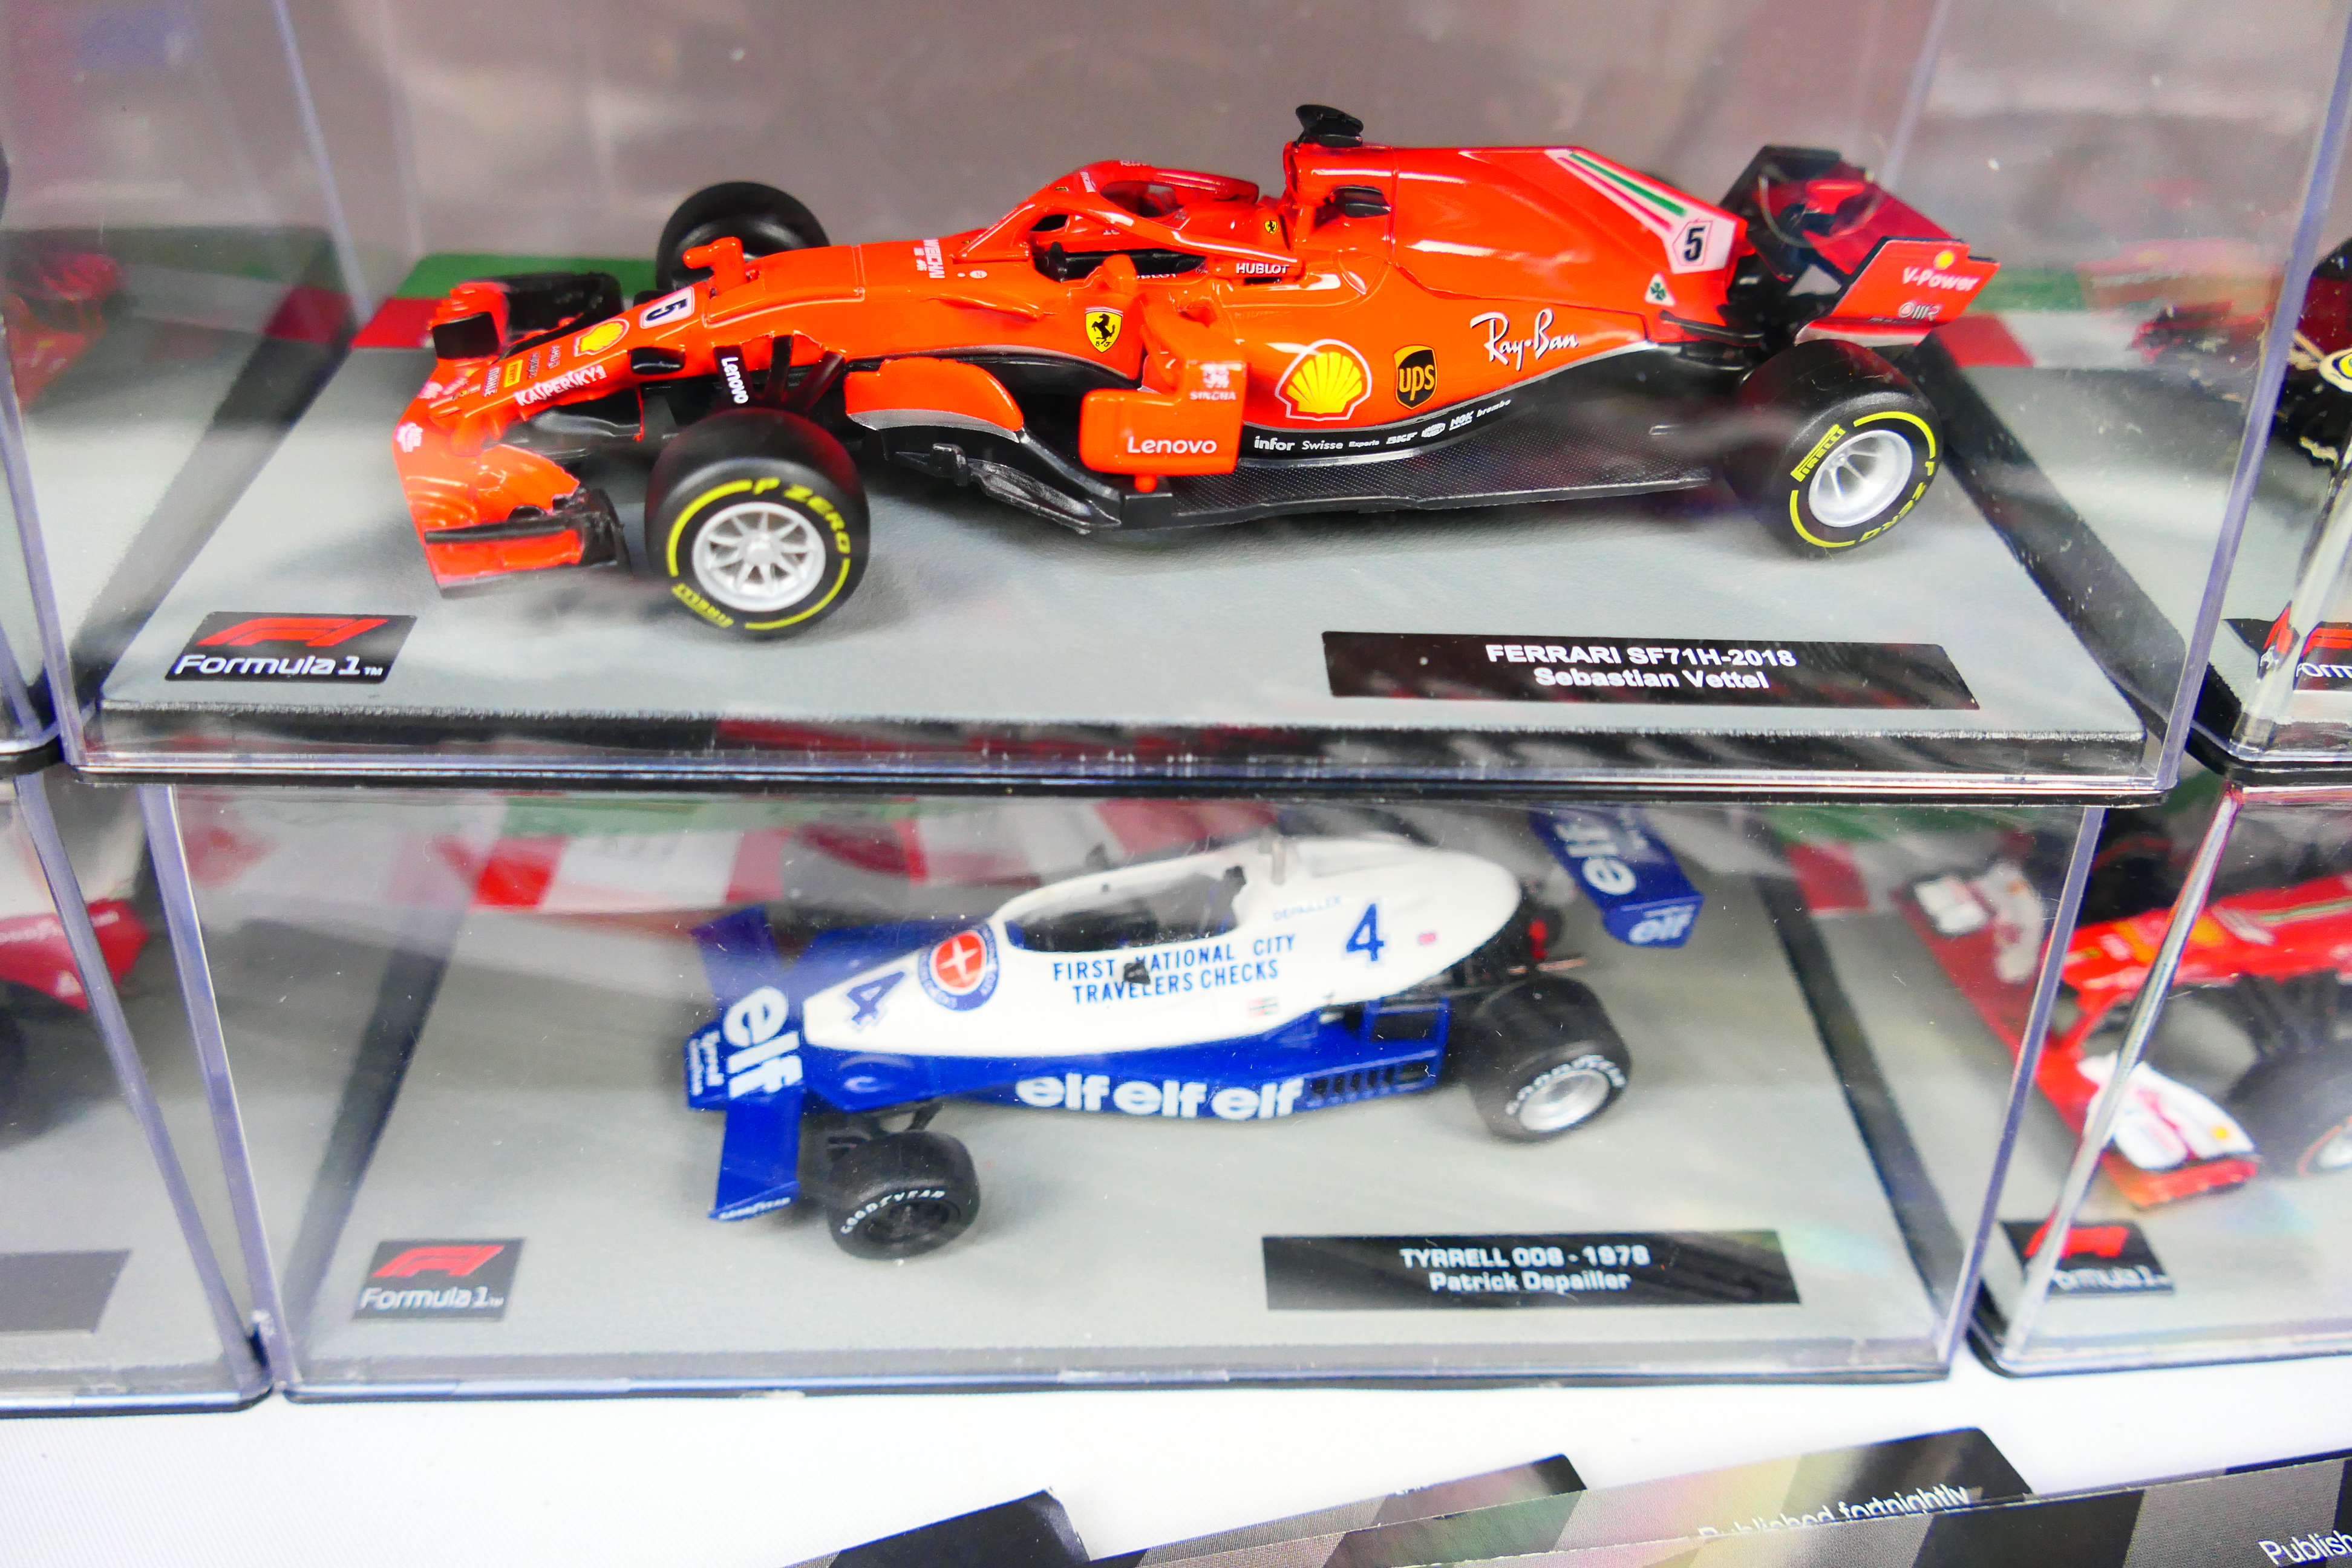 Centauria - Panini - Formula 1 - 35 x models from Formula 1 The Car Collection with the cars and - Image 13 of 14